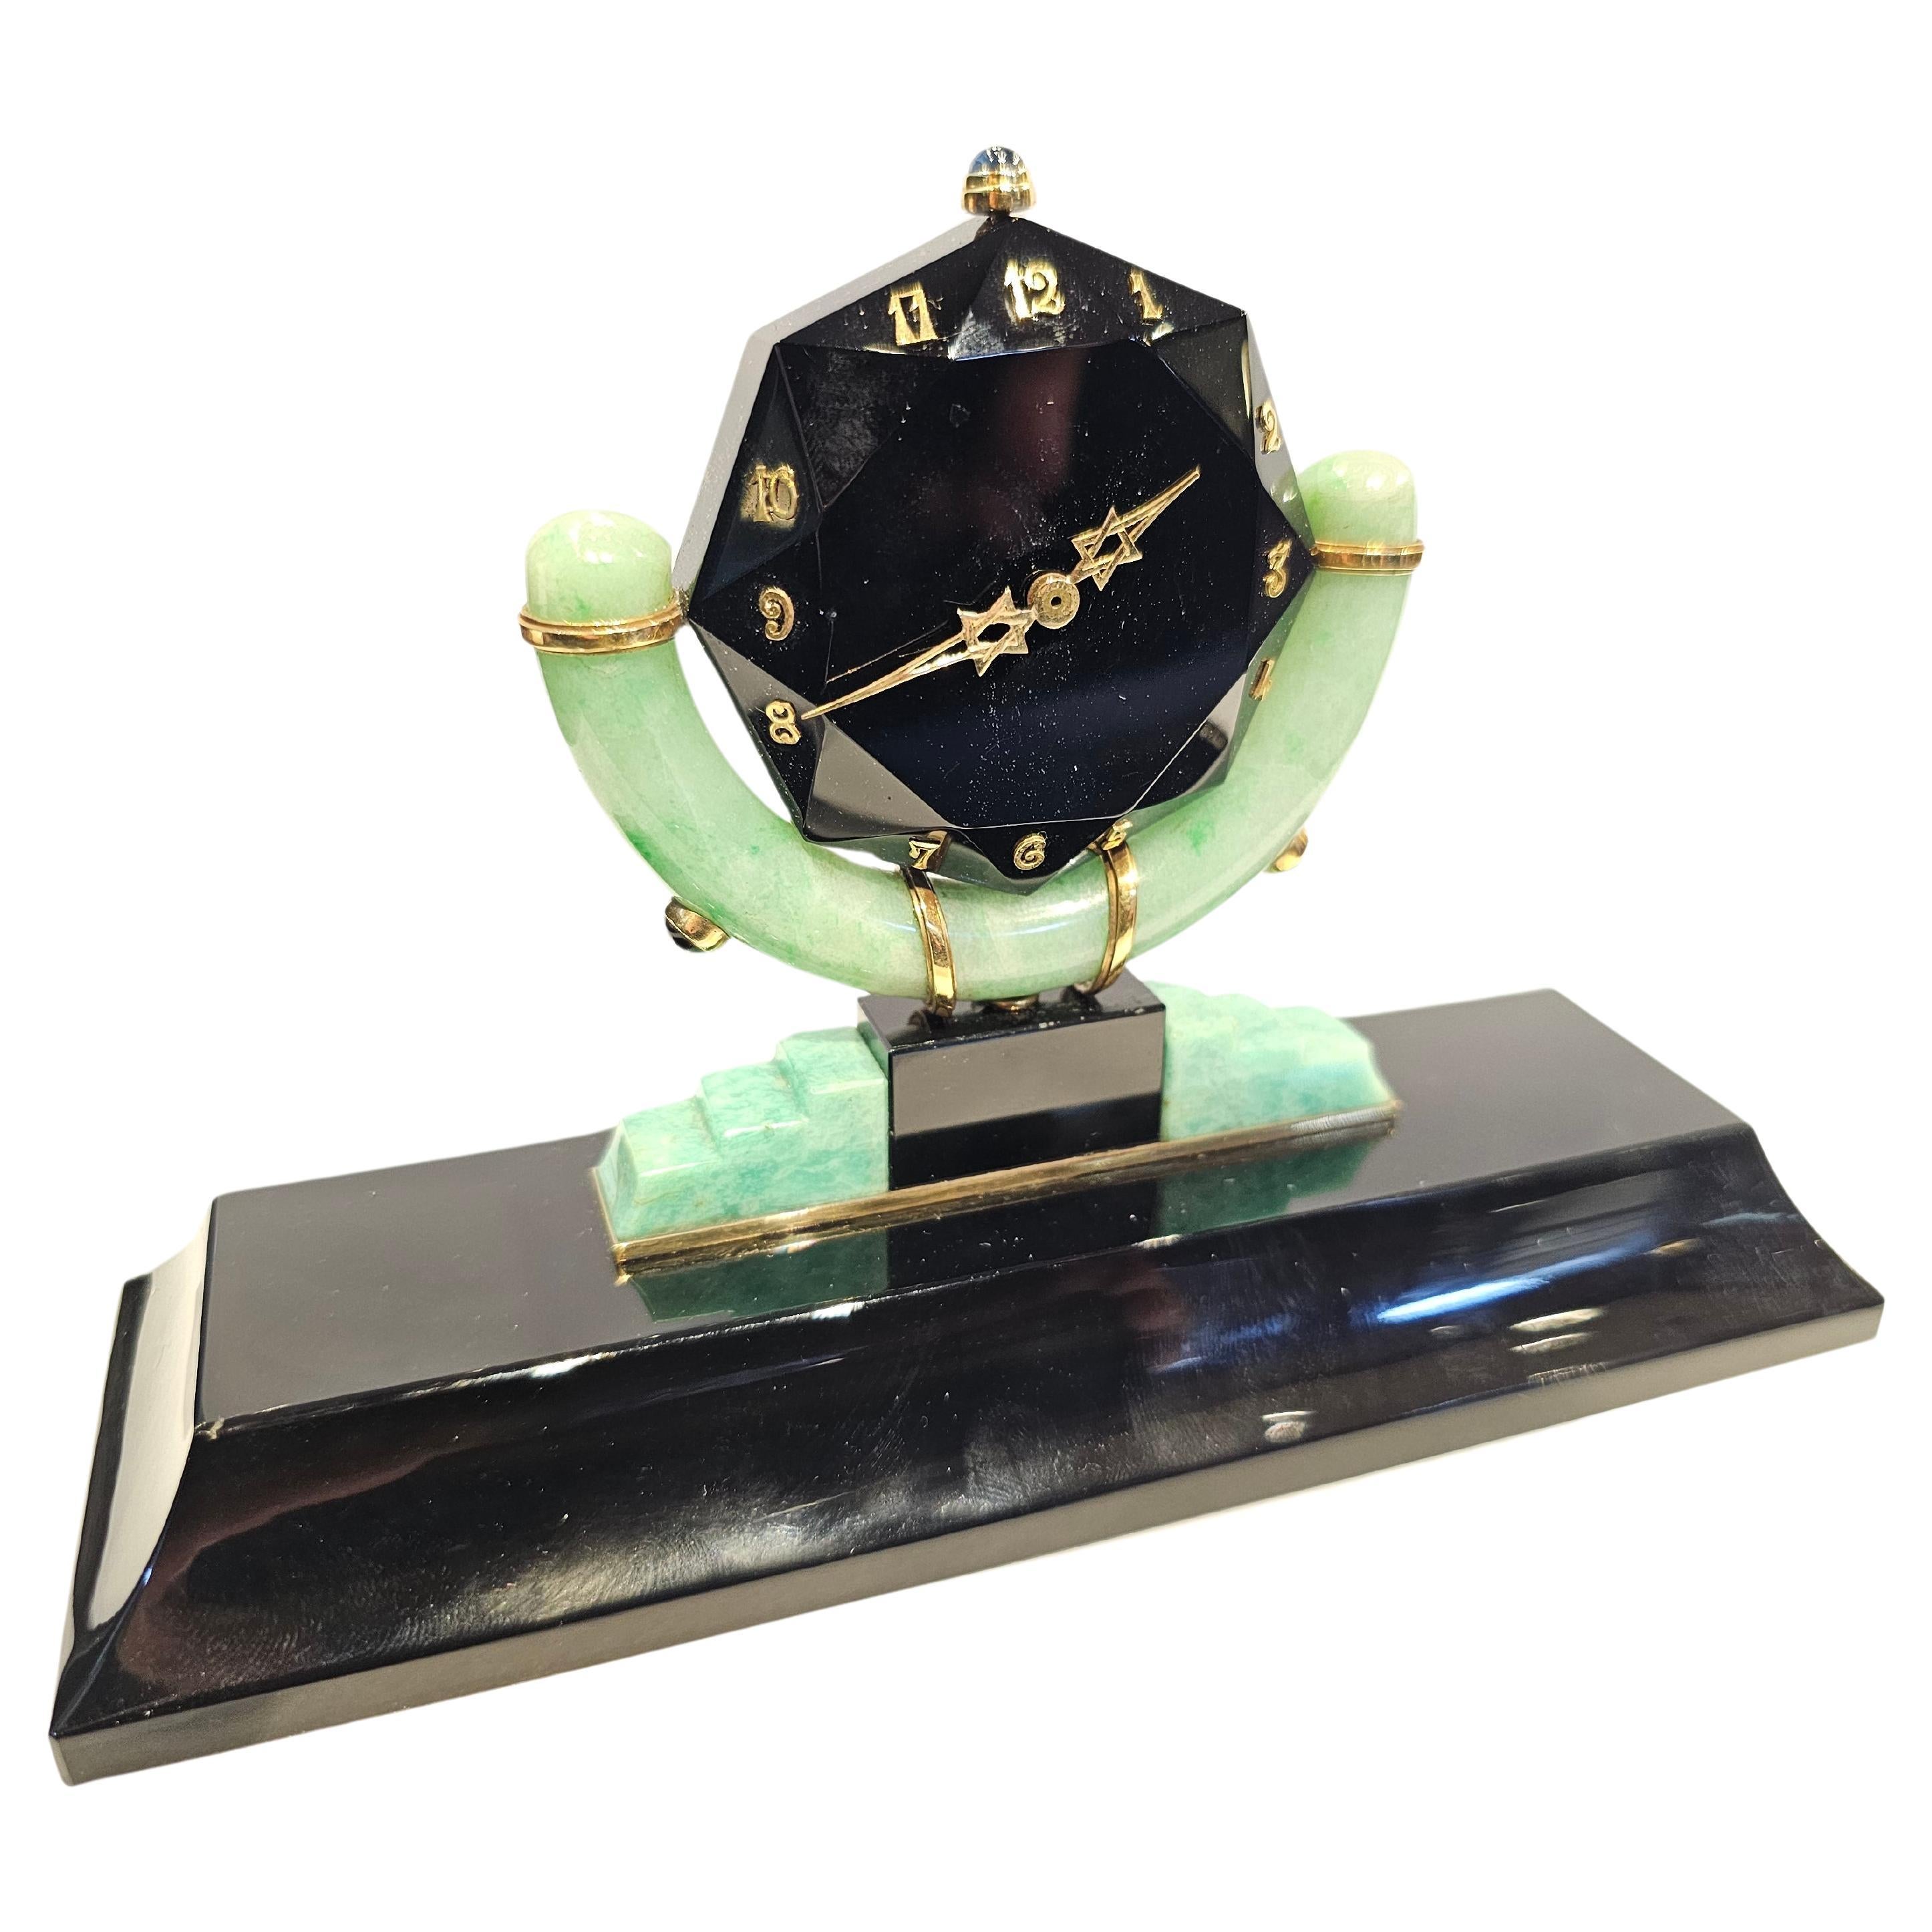 Rene Boivin Onyx Jade & Amazonite Art Deco Desk Clock

This extremely rare clock features an onyx face with gold numbers and hands topped with a cabochon sapphire, set on an onyx base enhanced with accents of jade and amazonite, further embellished